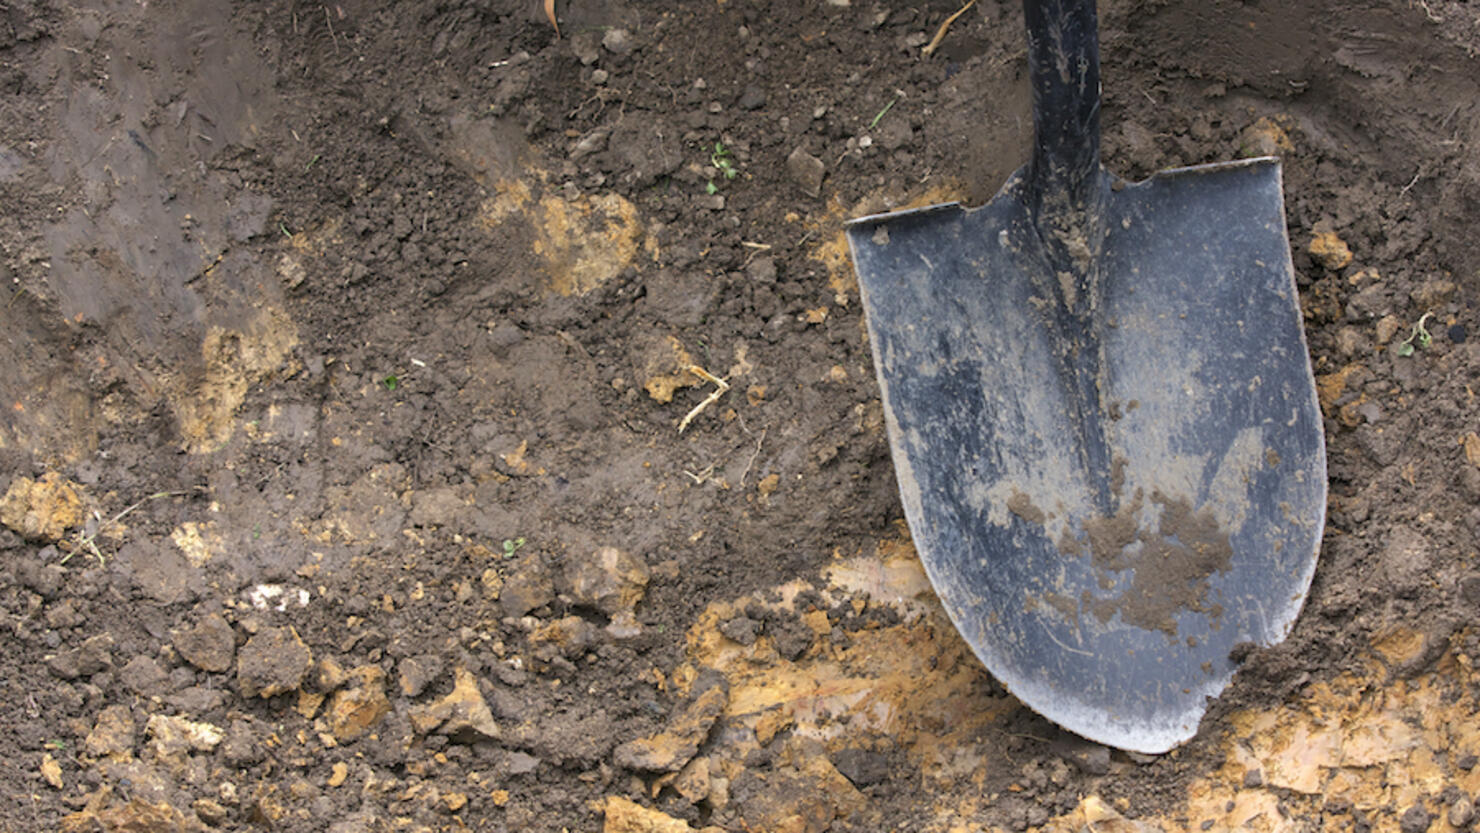 Close-up of spade shovel being used to dig a hole in soil